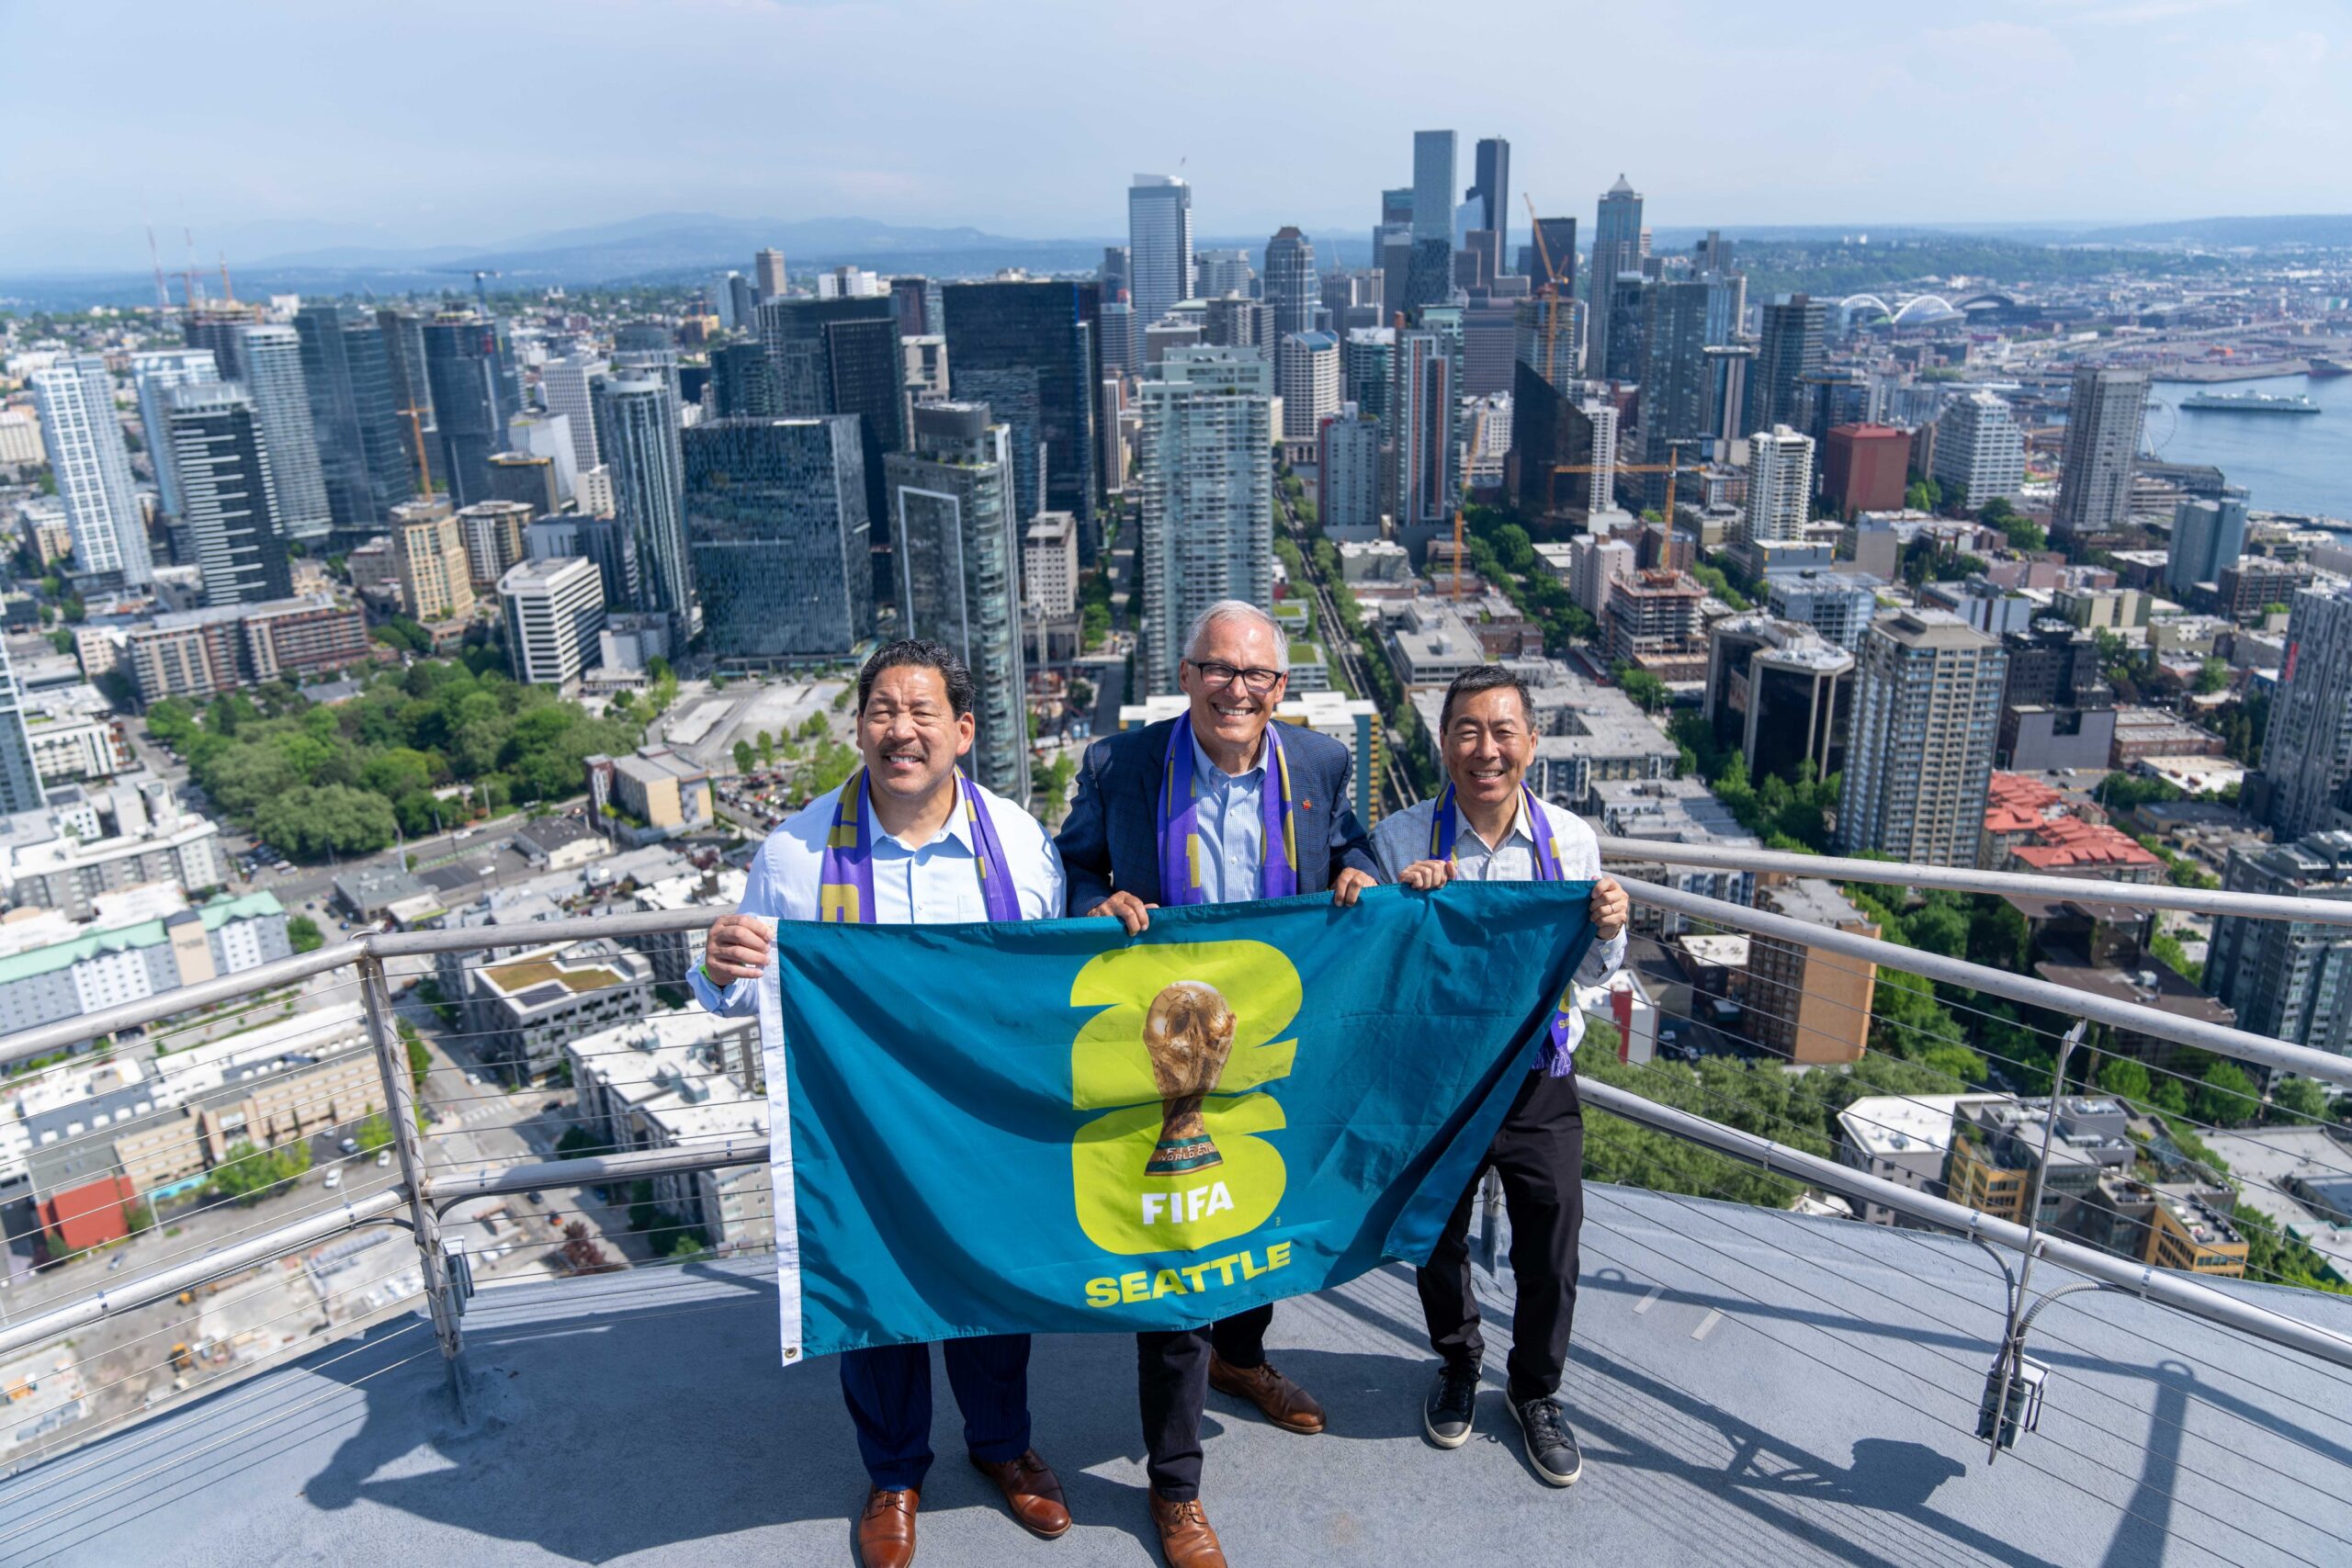 Seattle FIFA World Cup 2026 Organizing Committee Appoints Lisa